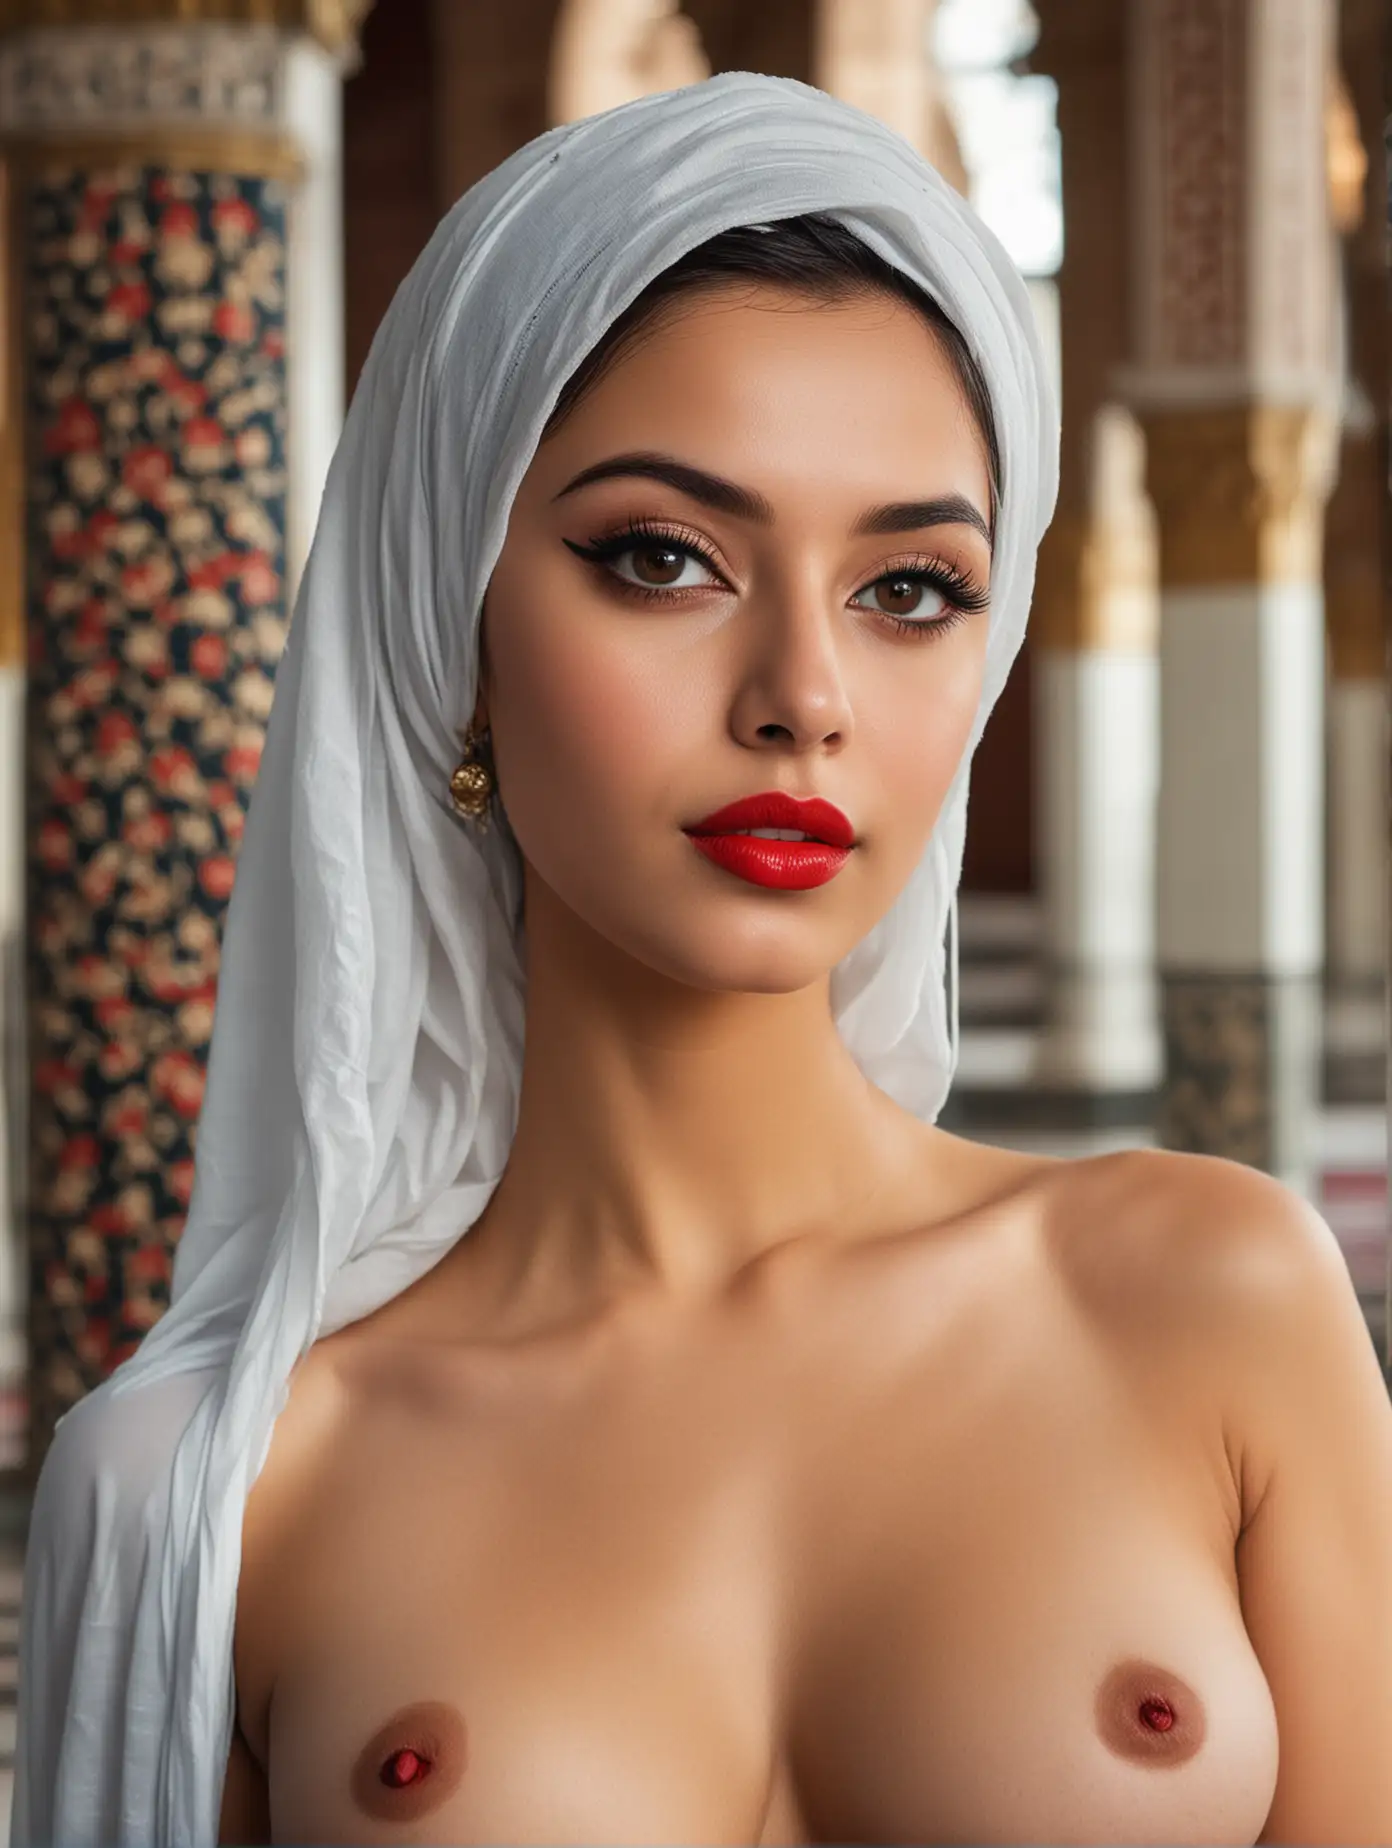 Muslim-Girl-with-Red-Lipstick-and-Eyeliner-in-Mosque